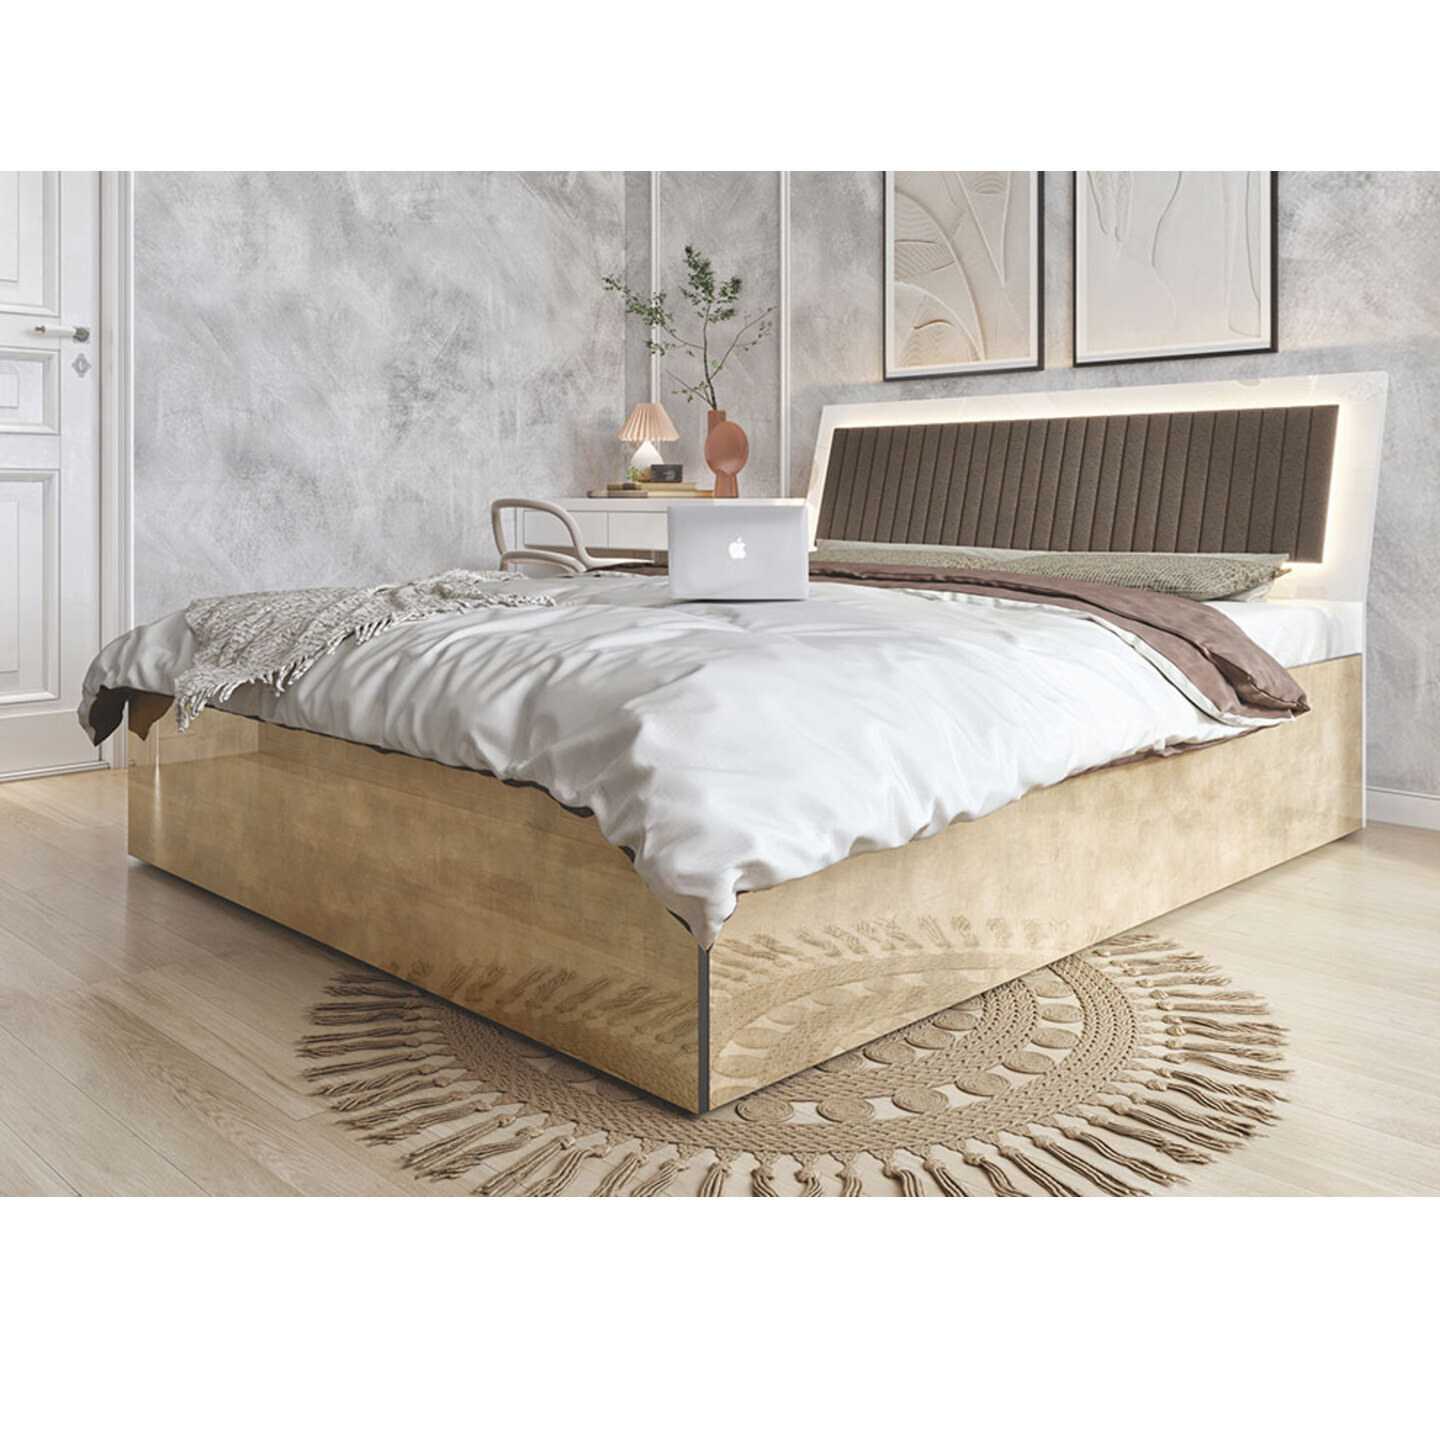 RLF Queen Size Bed 78"x60" Neon In Brown Colour